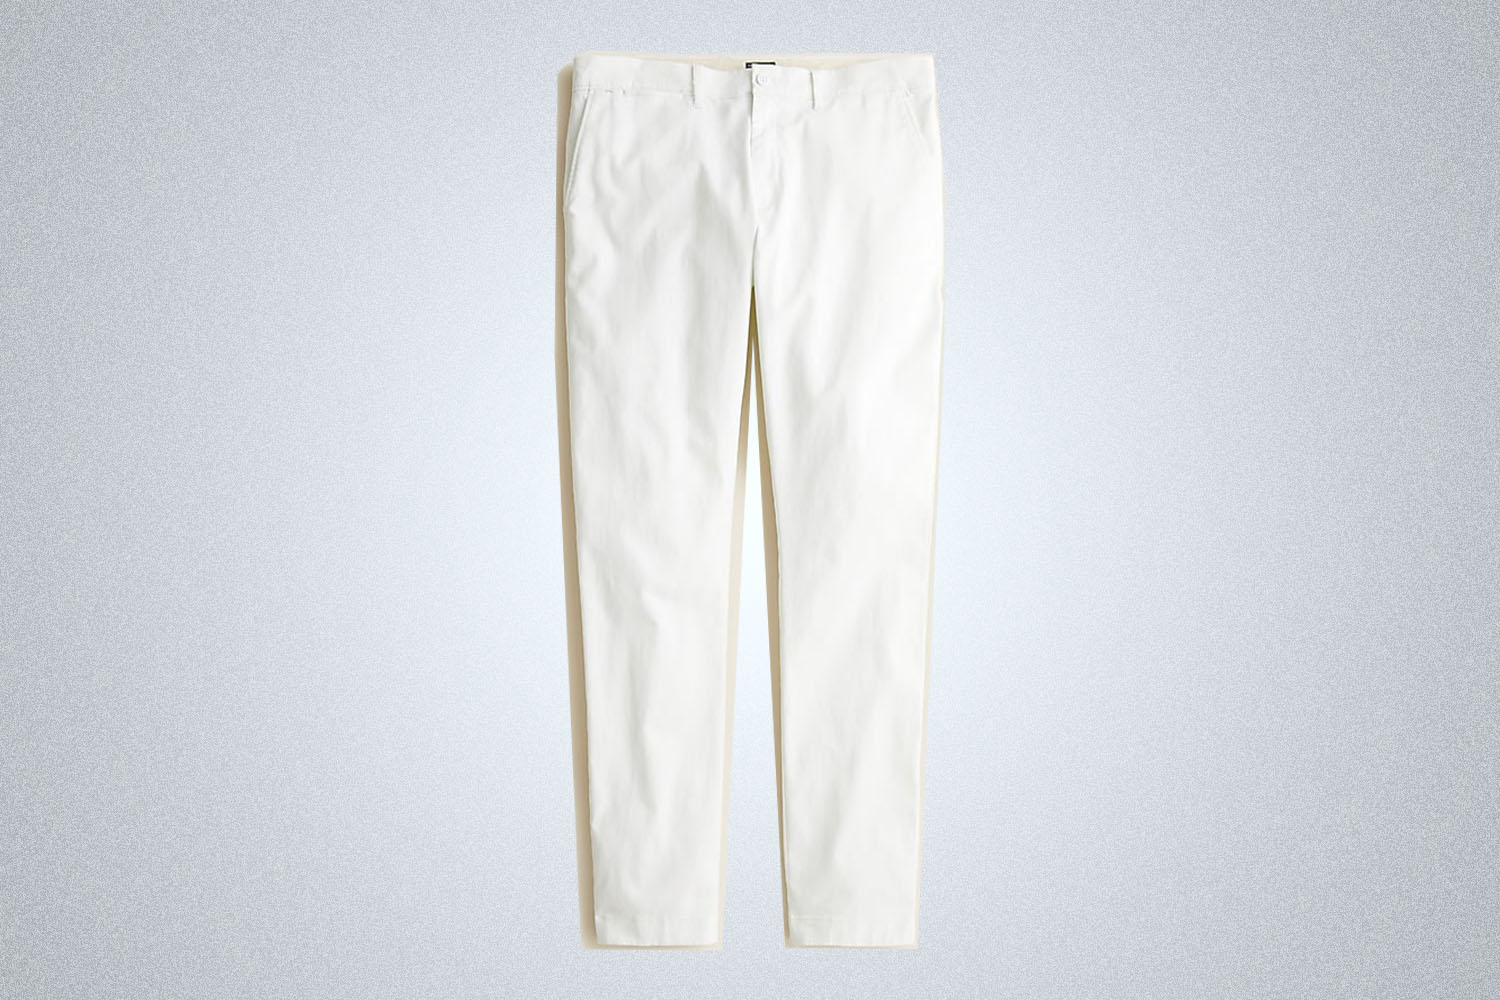 a pair of white pants from J.Crew